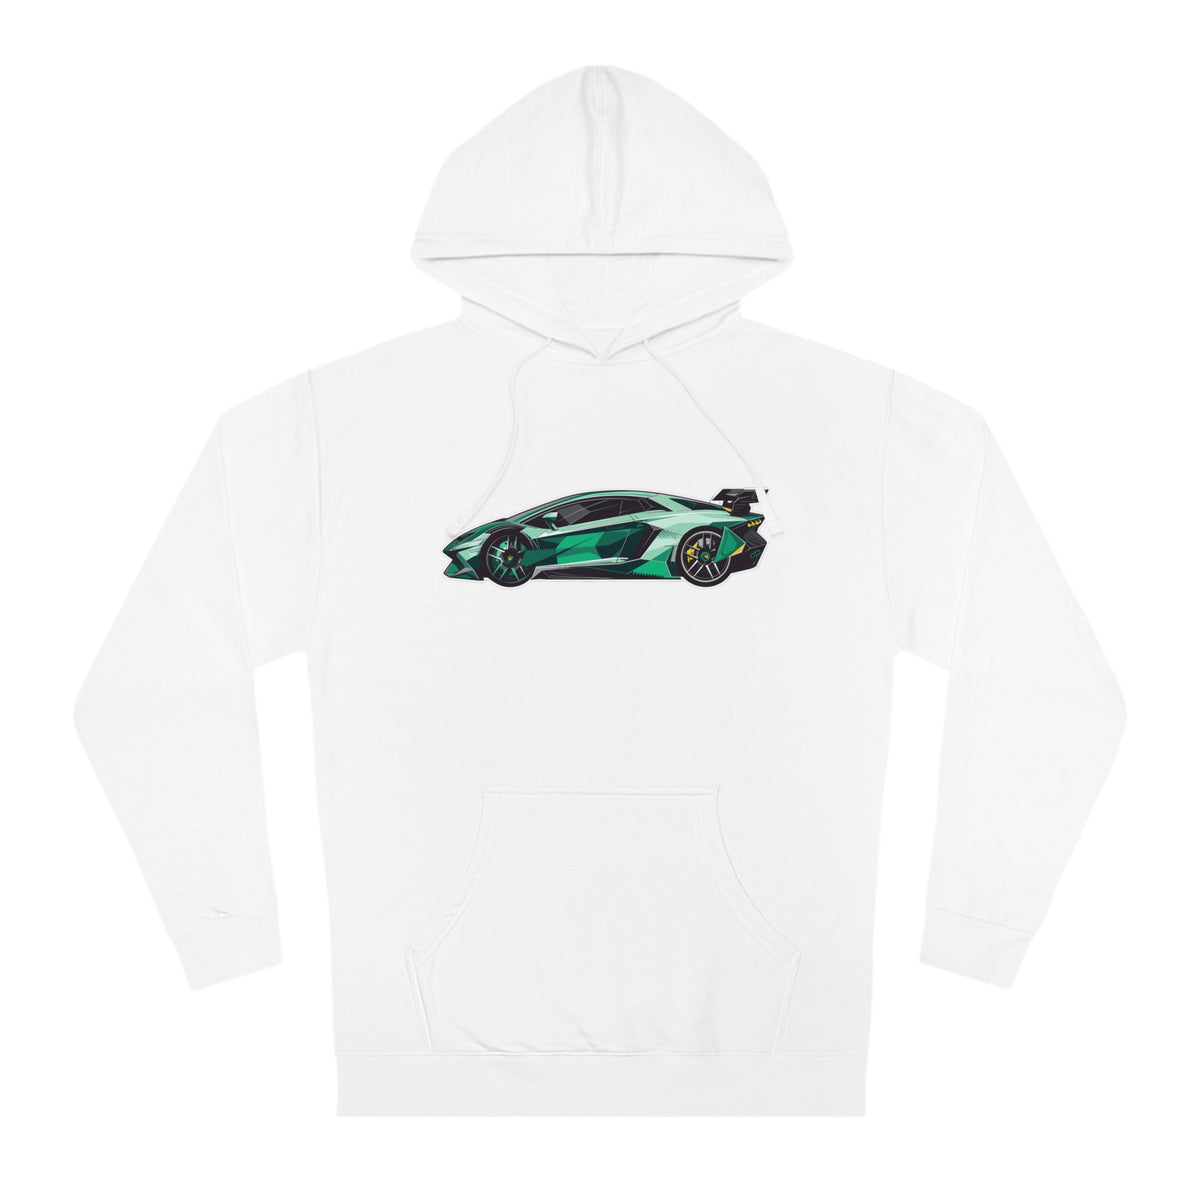 HyperDrive Hoodie: The Ultimate Apparel for the Futurist Racer/Hooded Sweatshirt